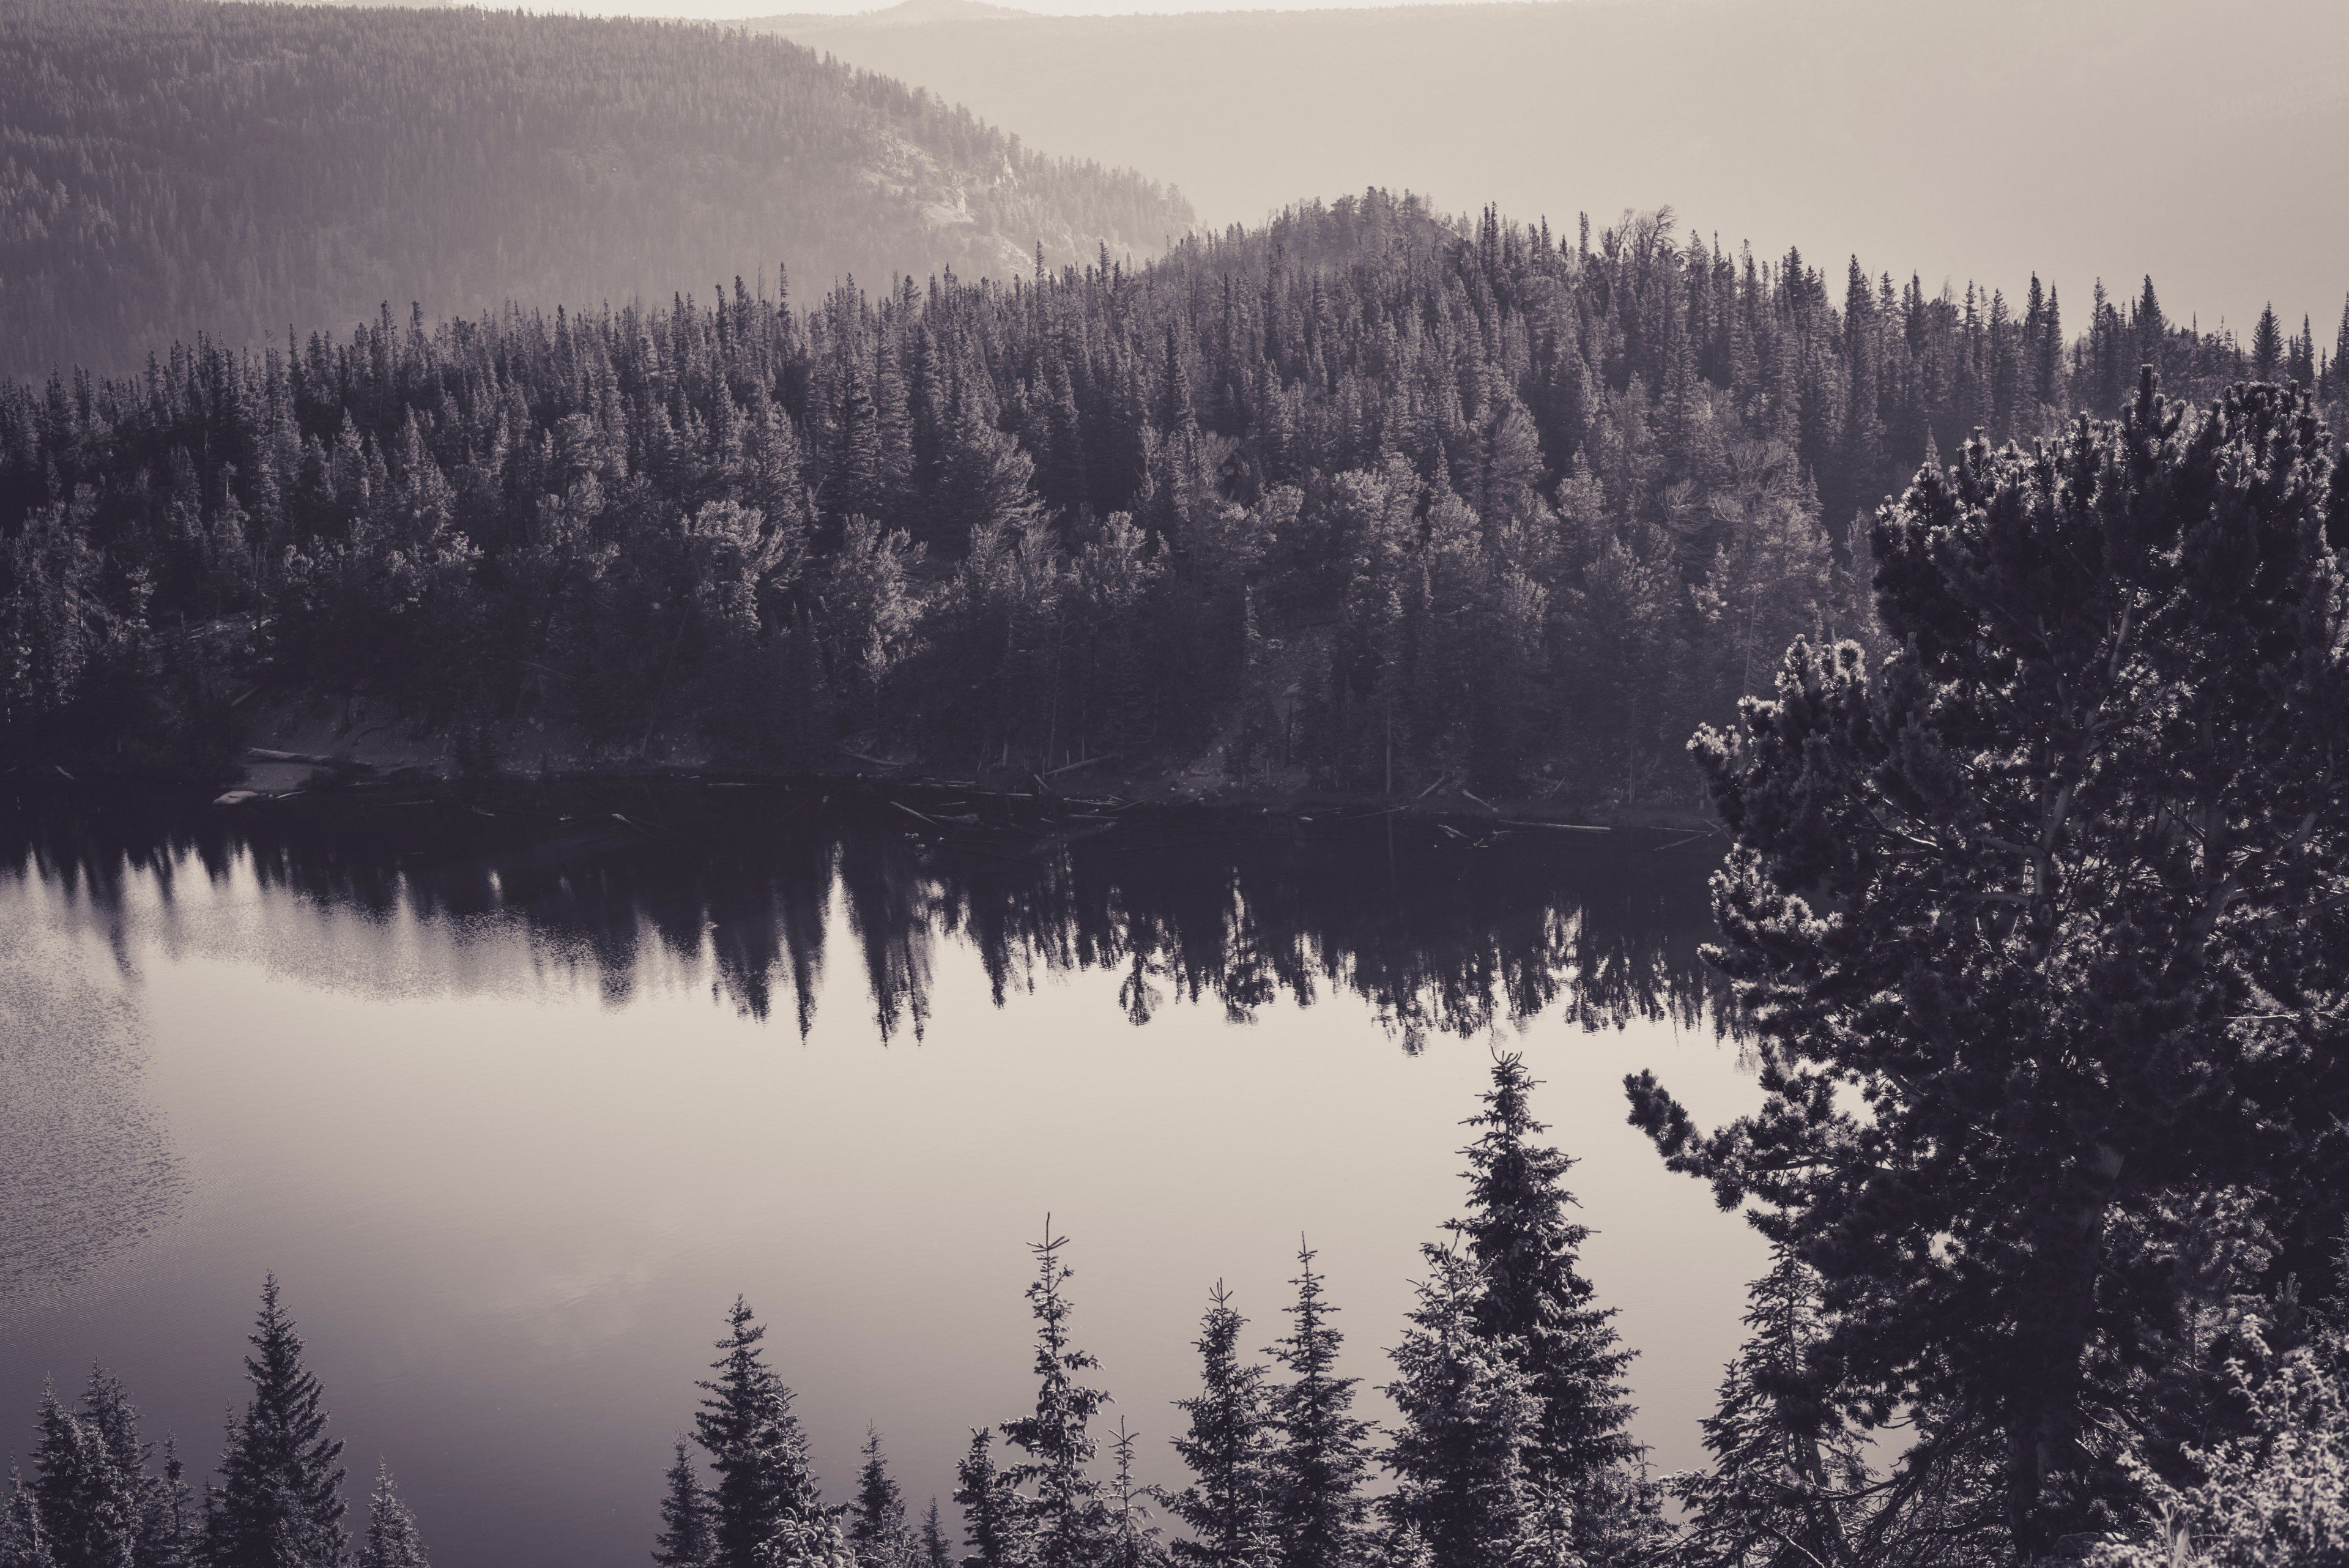 Wallpaper / a black and white picture of woody hills by a lake, black and white forest lake 4k wallpaper